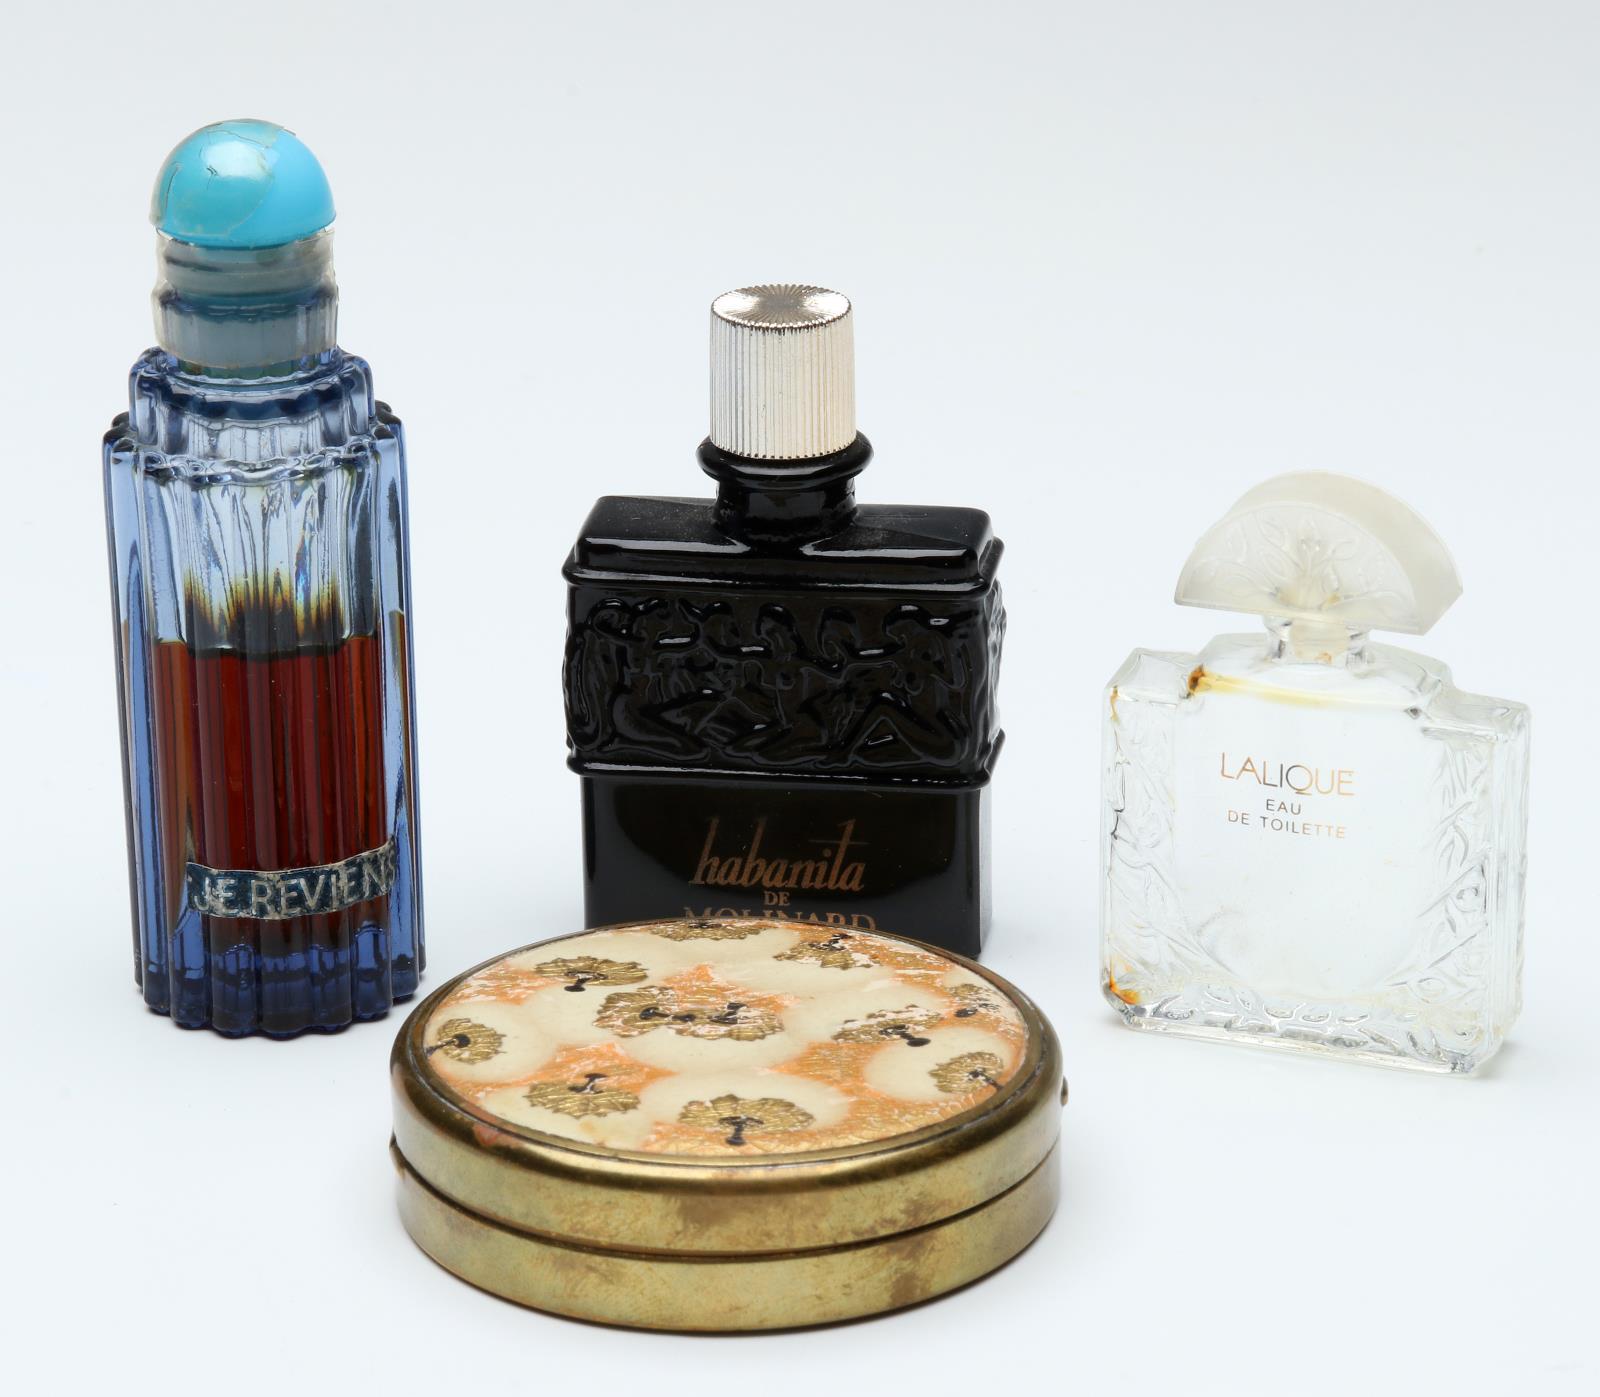 'LALIQUE' AND OTHER COMMERCIAL PERFUME BOTTLES